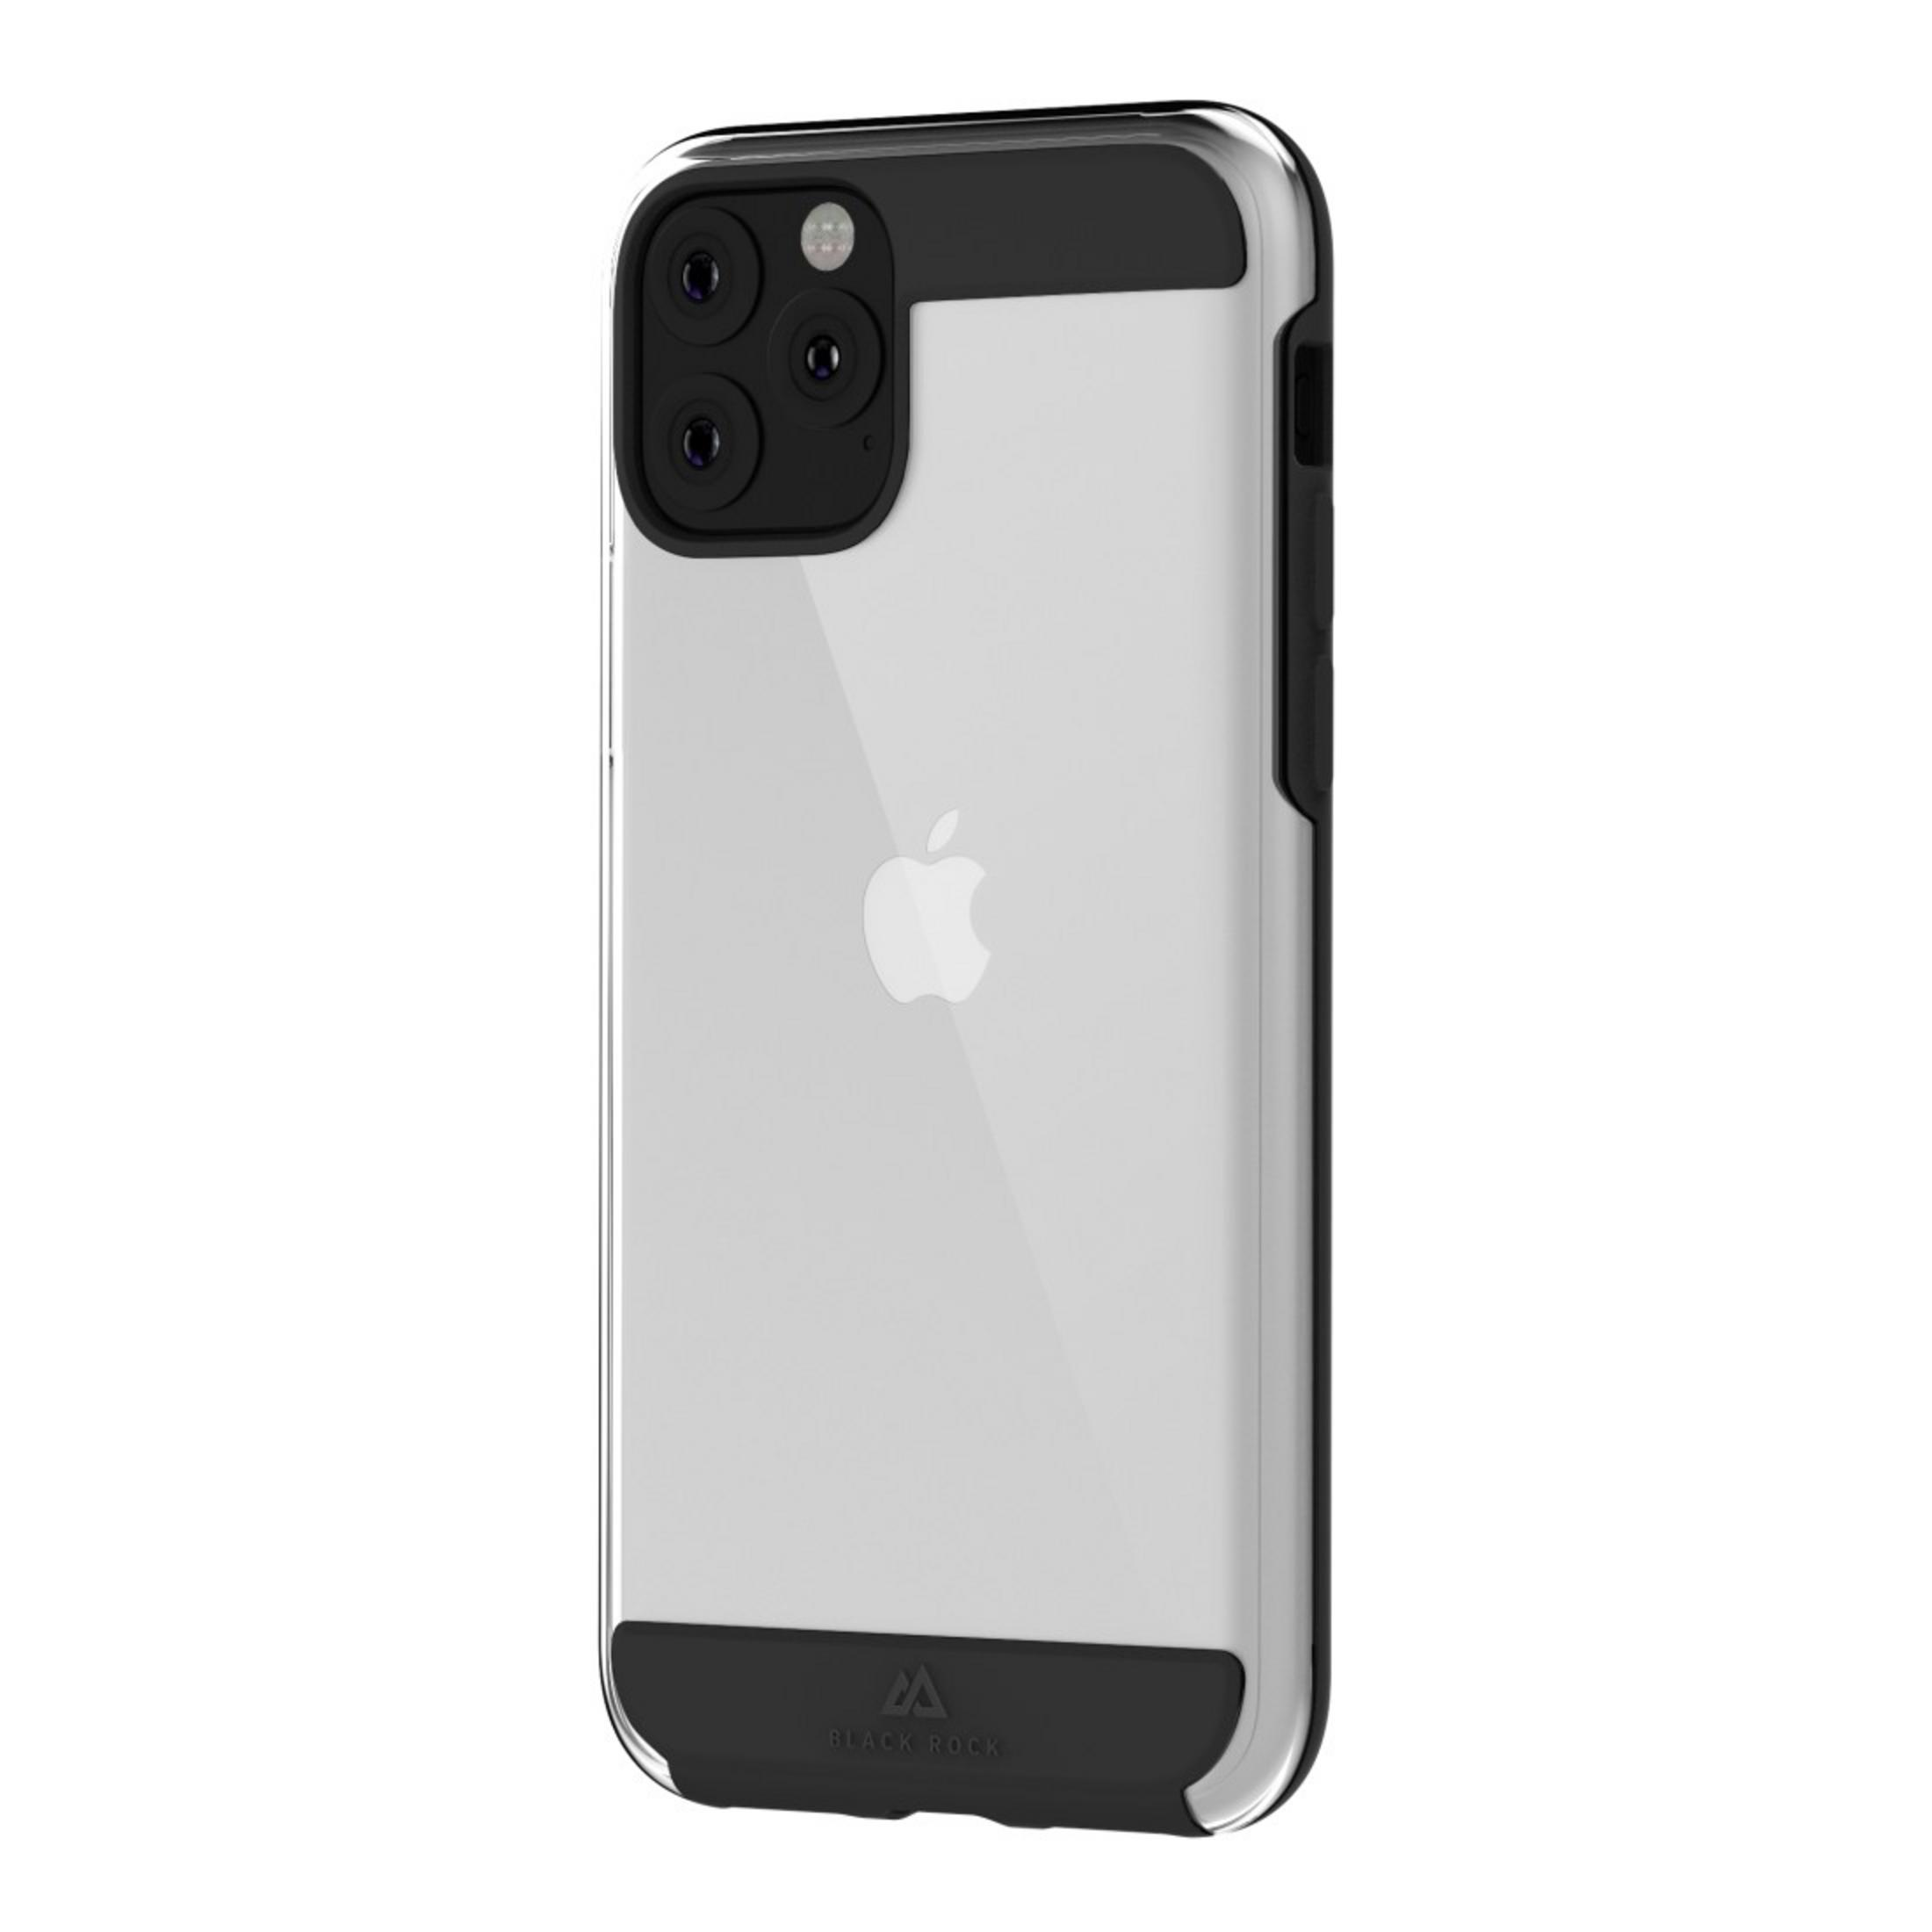 ROBUST BLACK ROCK 11 SW, Backcover, Pro, 11 PRO 186970 IPH iPhone CO Apple, Schwarz AIR